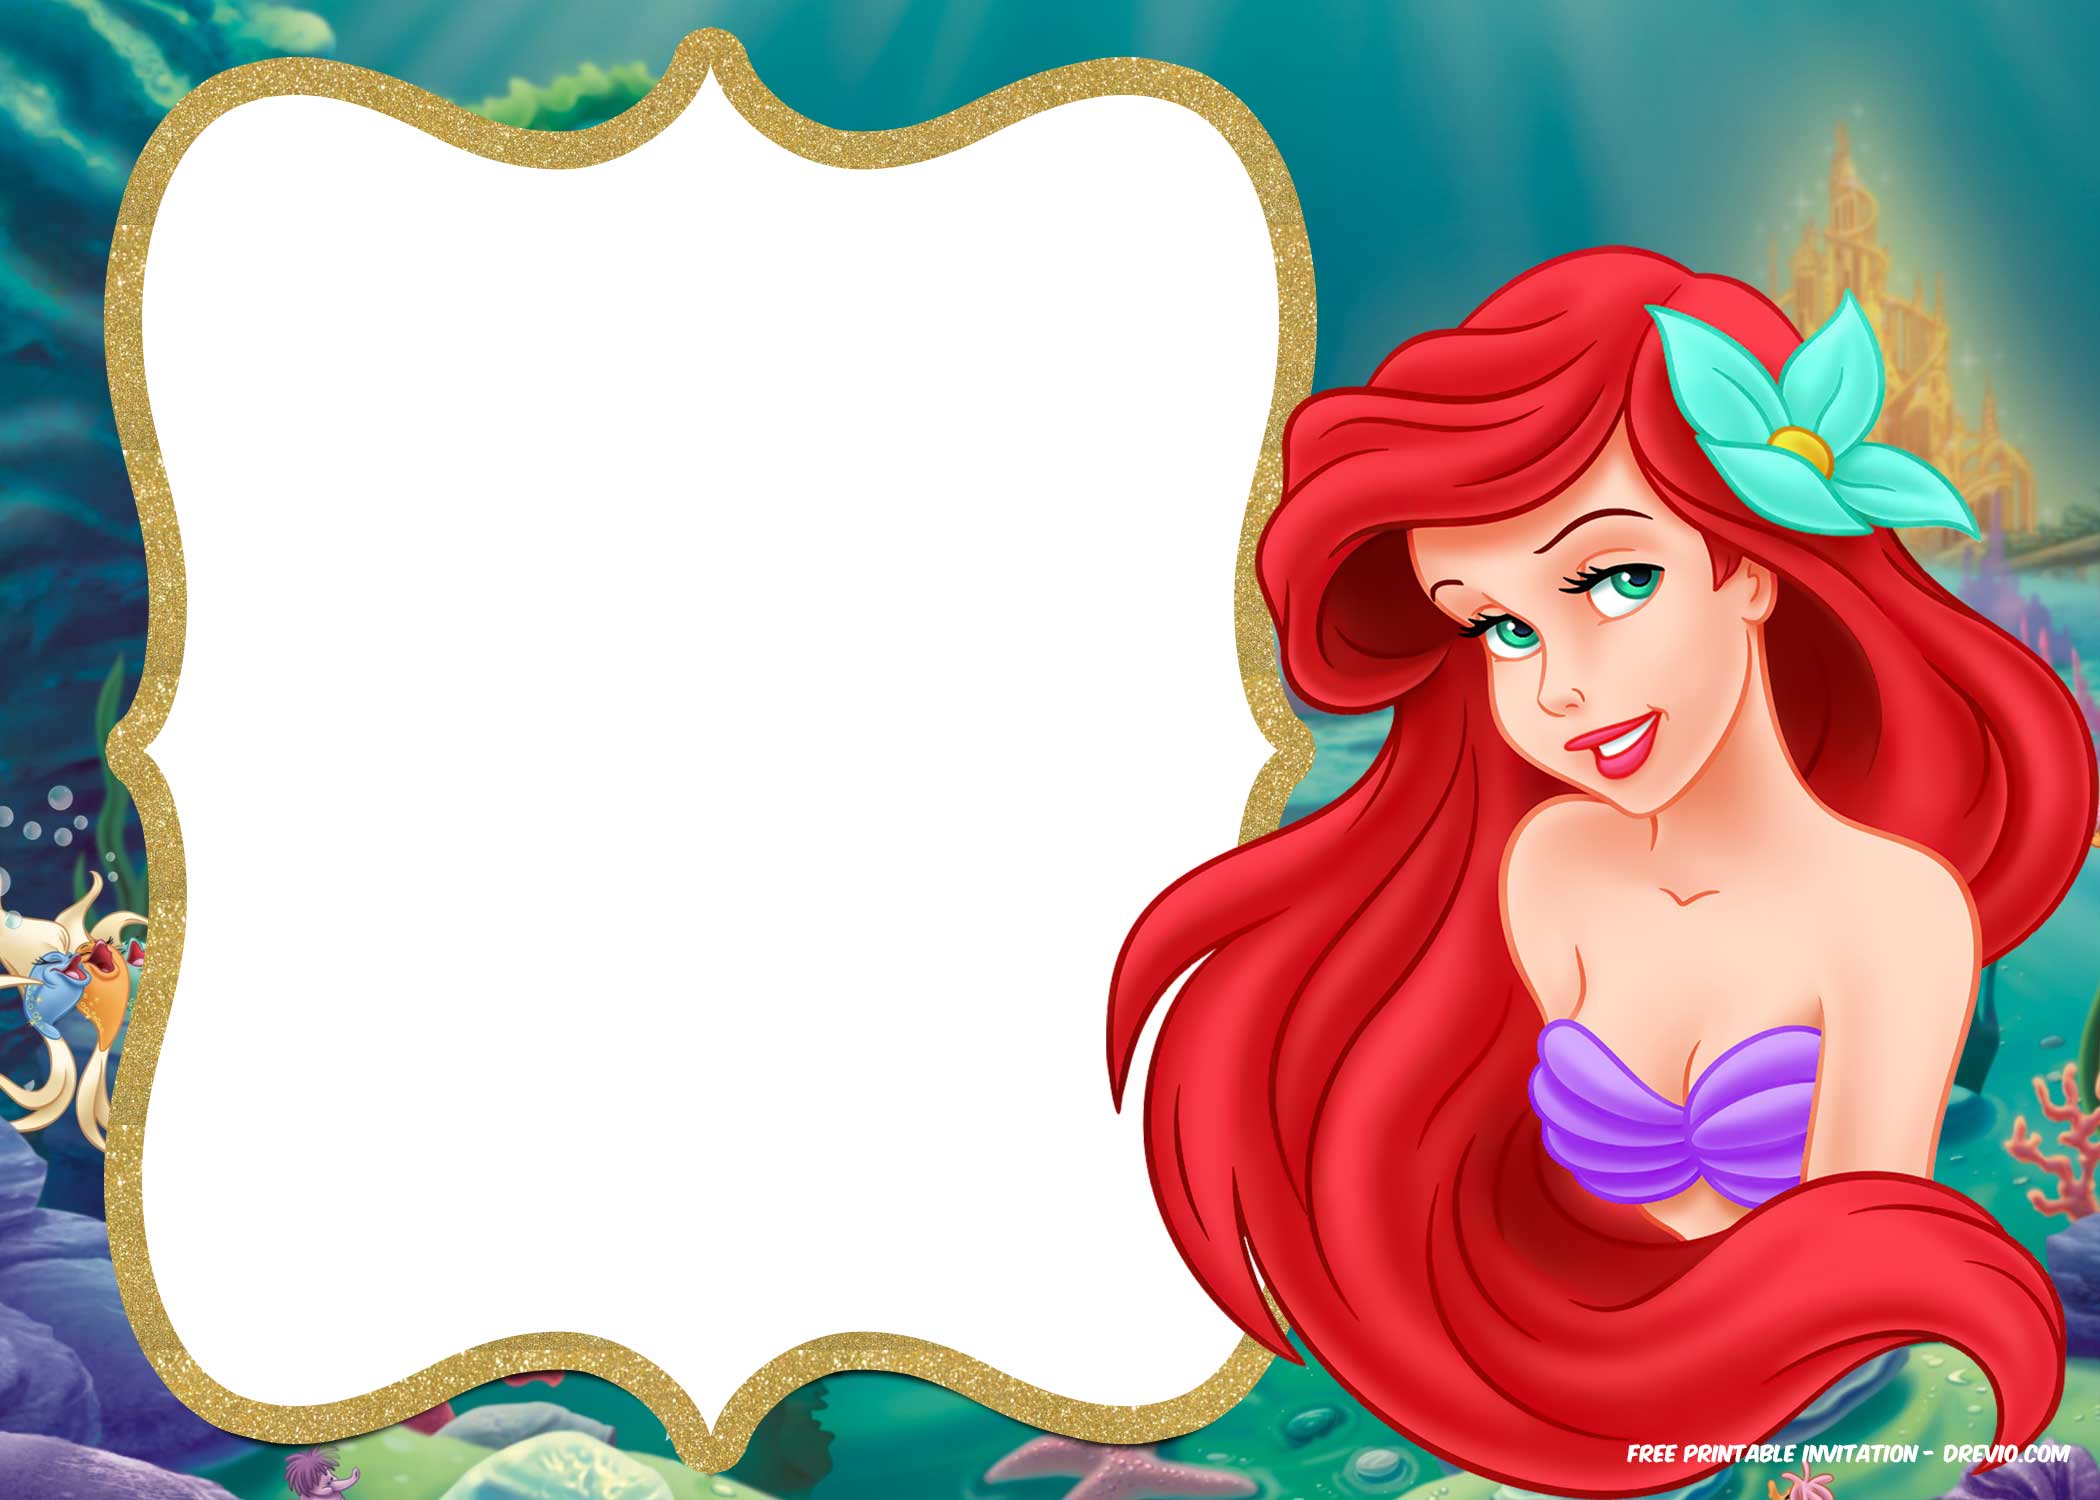 Updated! Free Printable Ariel the Little Mermaid Invitation Template | FREE Invitation Templates